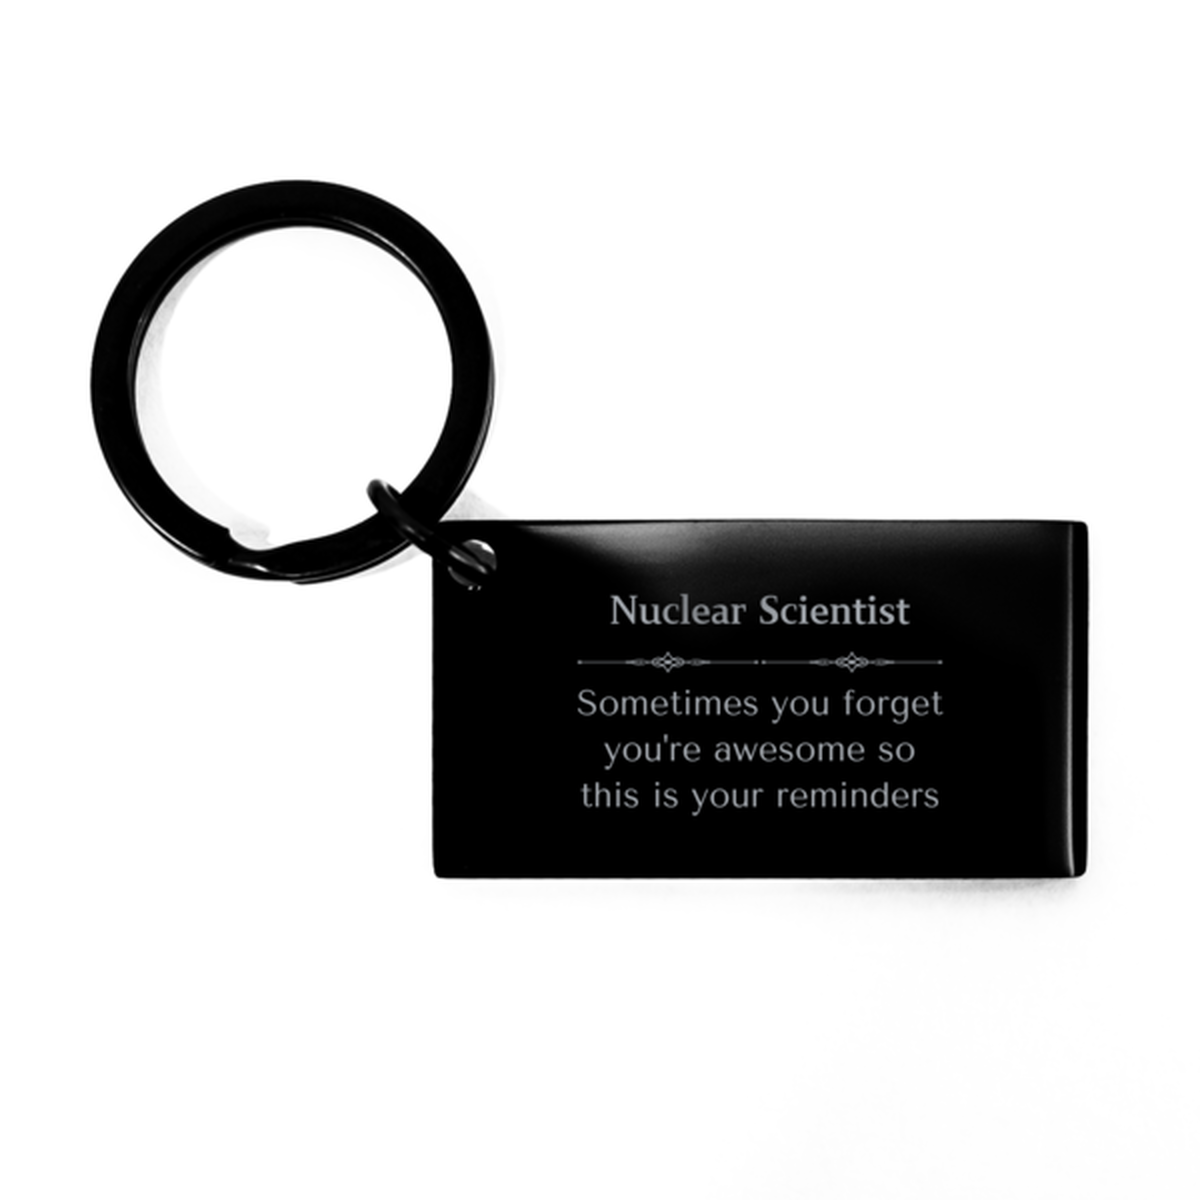 Sentimental Nuclear Scientist Keychain, Performer Sometimes you forget you're awesome so this is your reminders, Graduation Christmas Birthday Gifts for Nuclear Scientist, Men, Women, Coworkers